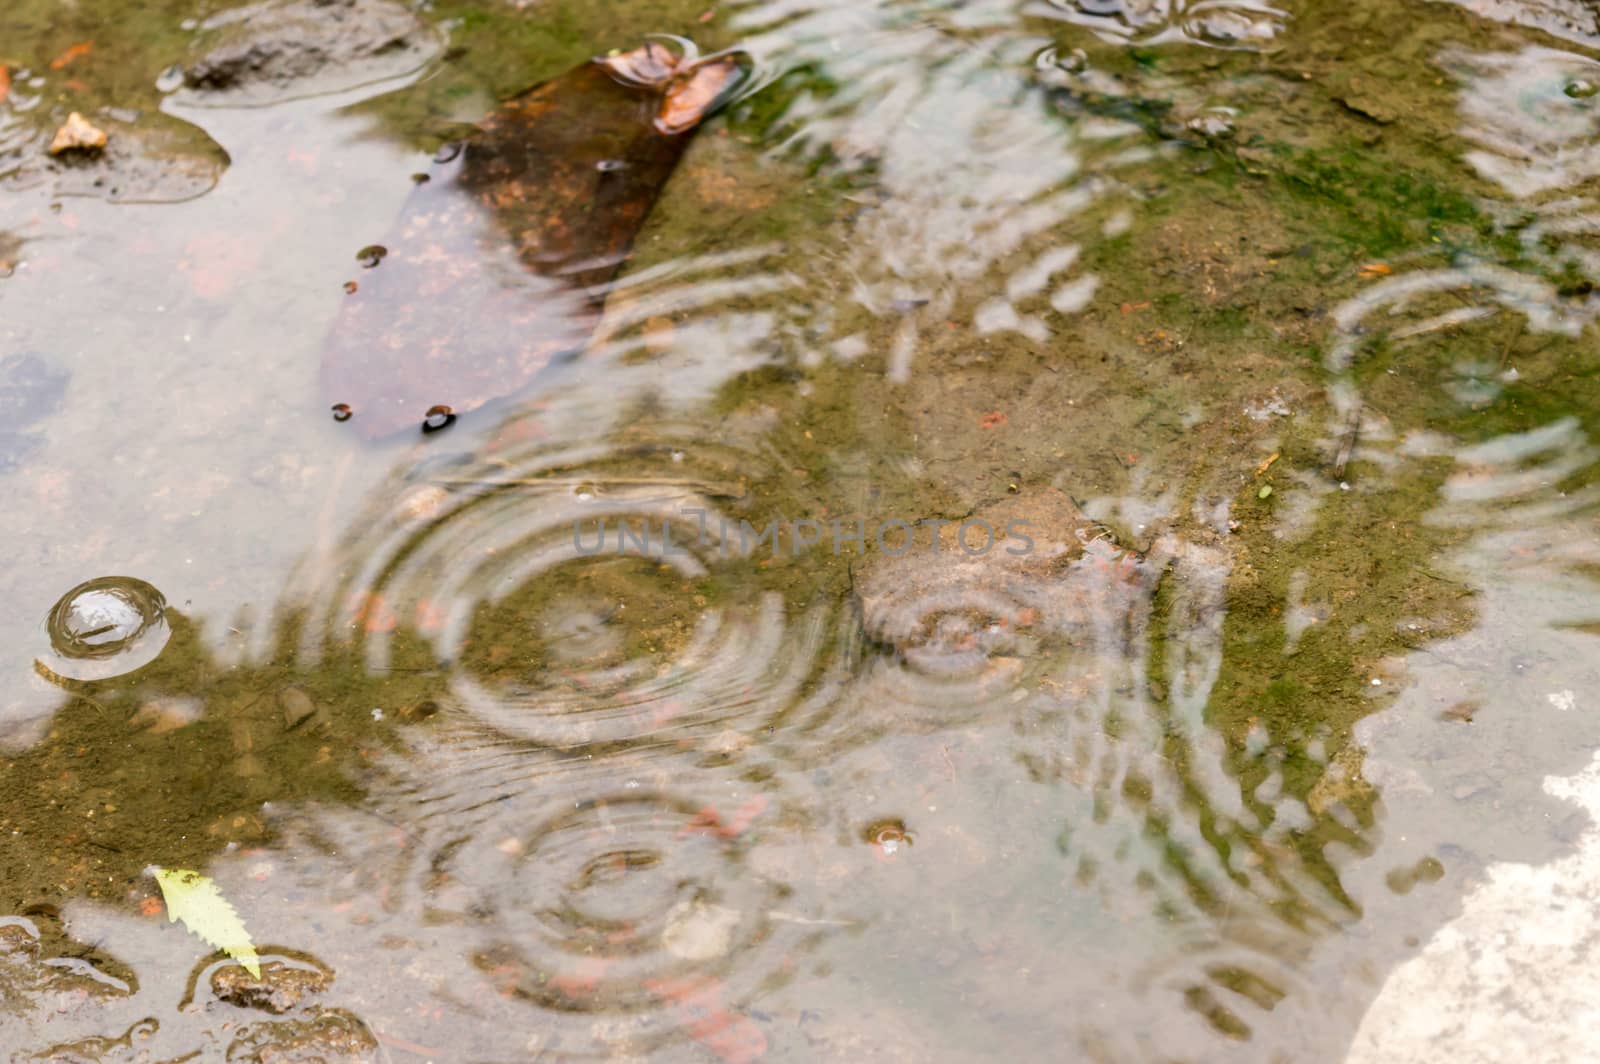 Rain drops in the water surface. Rain fall on the ground in rains season. Raindrops rippling in a puddle with bright sky reflection on it. Abstract Nature Background.